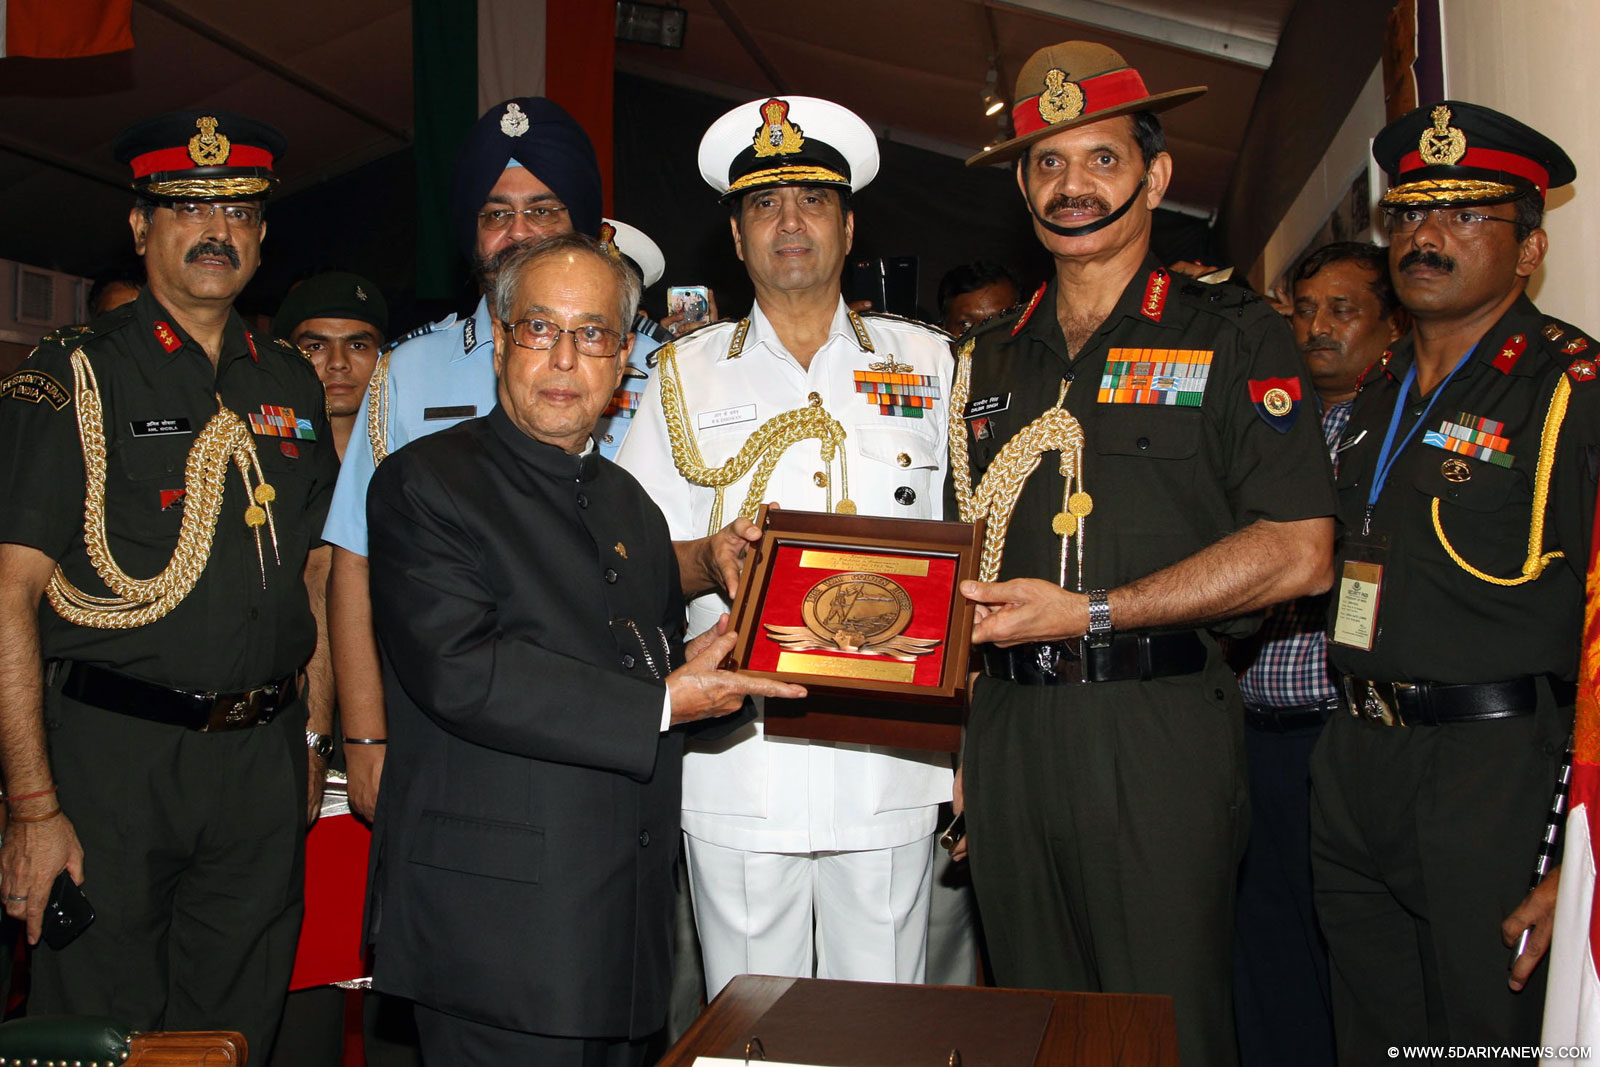 The President, Pranab Mukherjee being presented a memento by the Chief of Army Staff, General Dalbir Singh and the Chief of Naval Staff, Admiral R.K. Dhowan, at ‘Shauryanjali’, a commemorative exhibition on Golden Jubilee of 1965 war, at India Gate, in New Delhi on September 19, 2015.